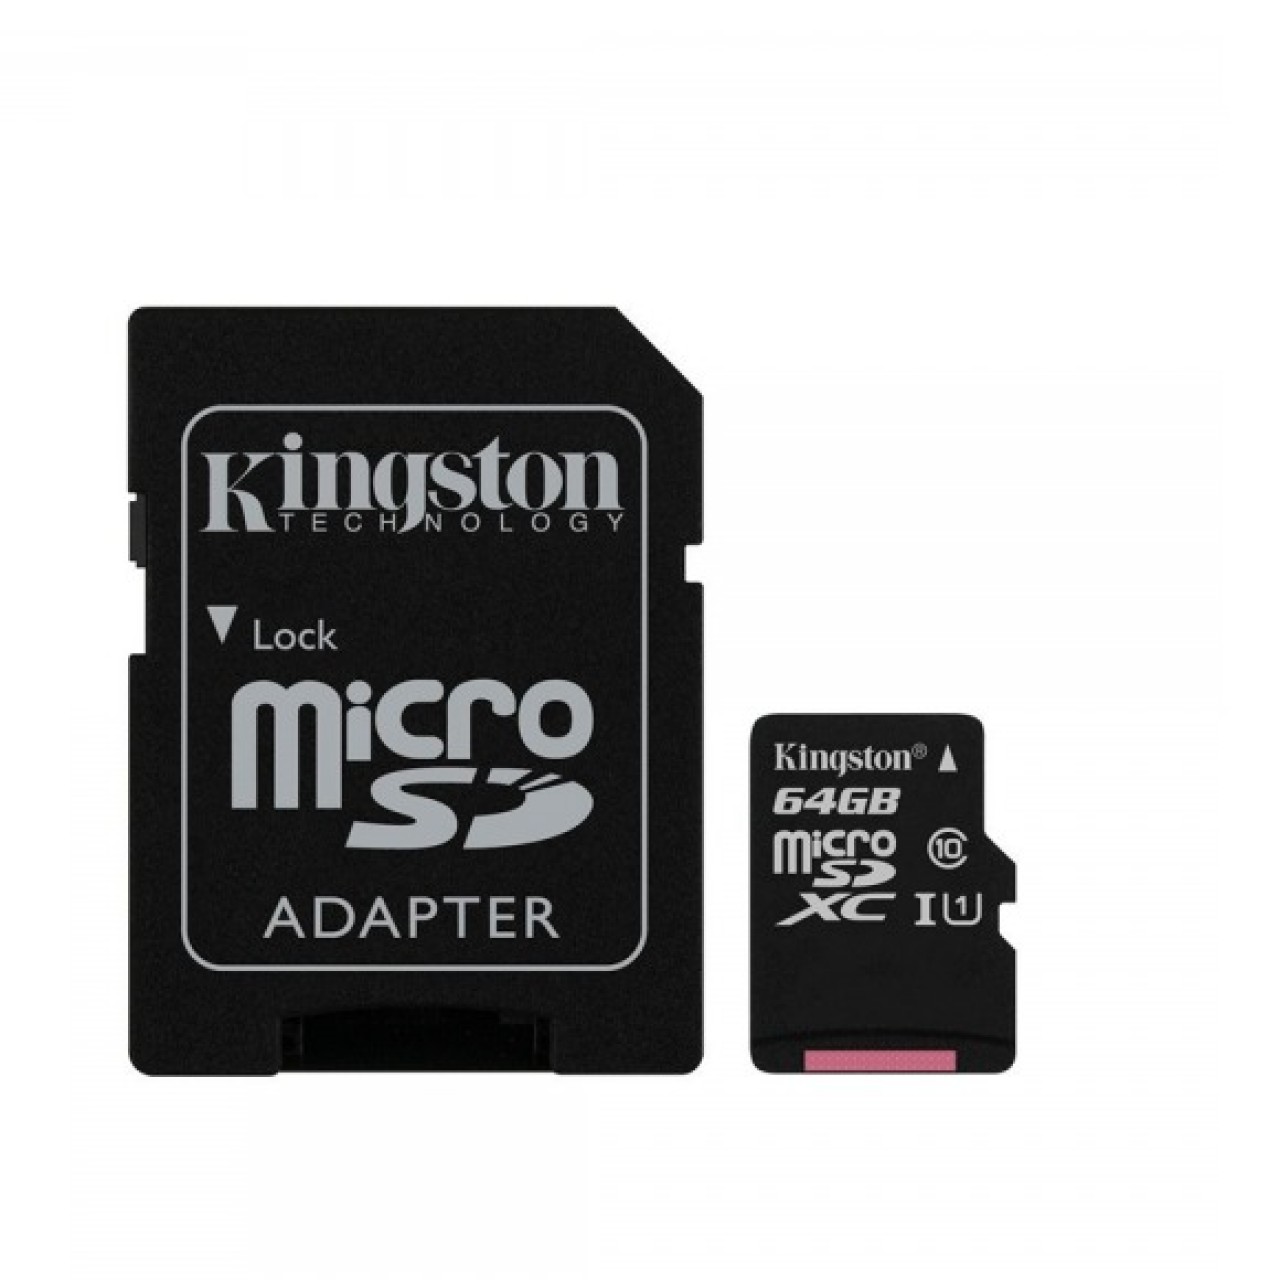 KIGSTONE 64GB Micro SDHC Memory Card With SD Adapter